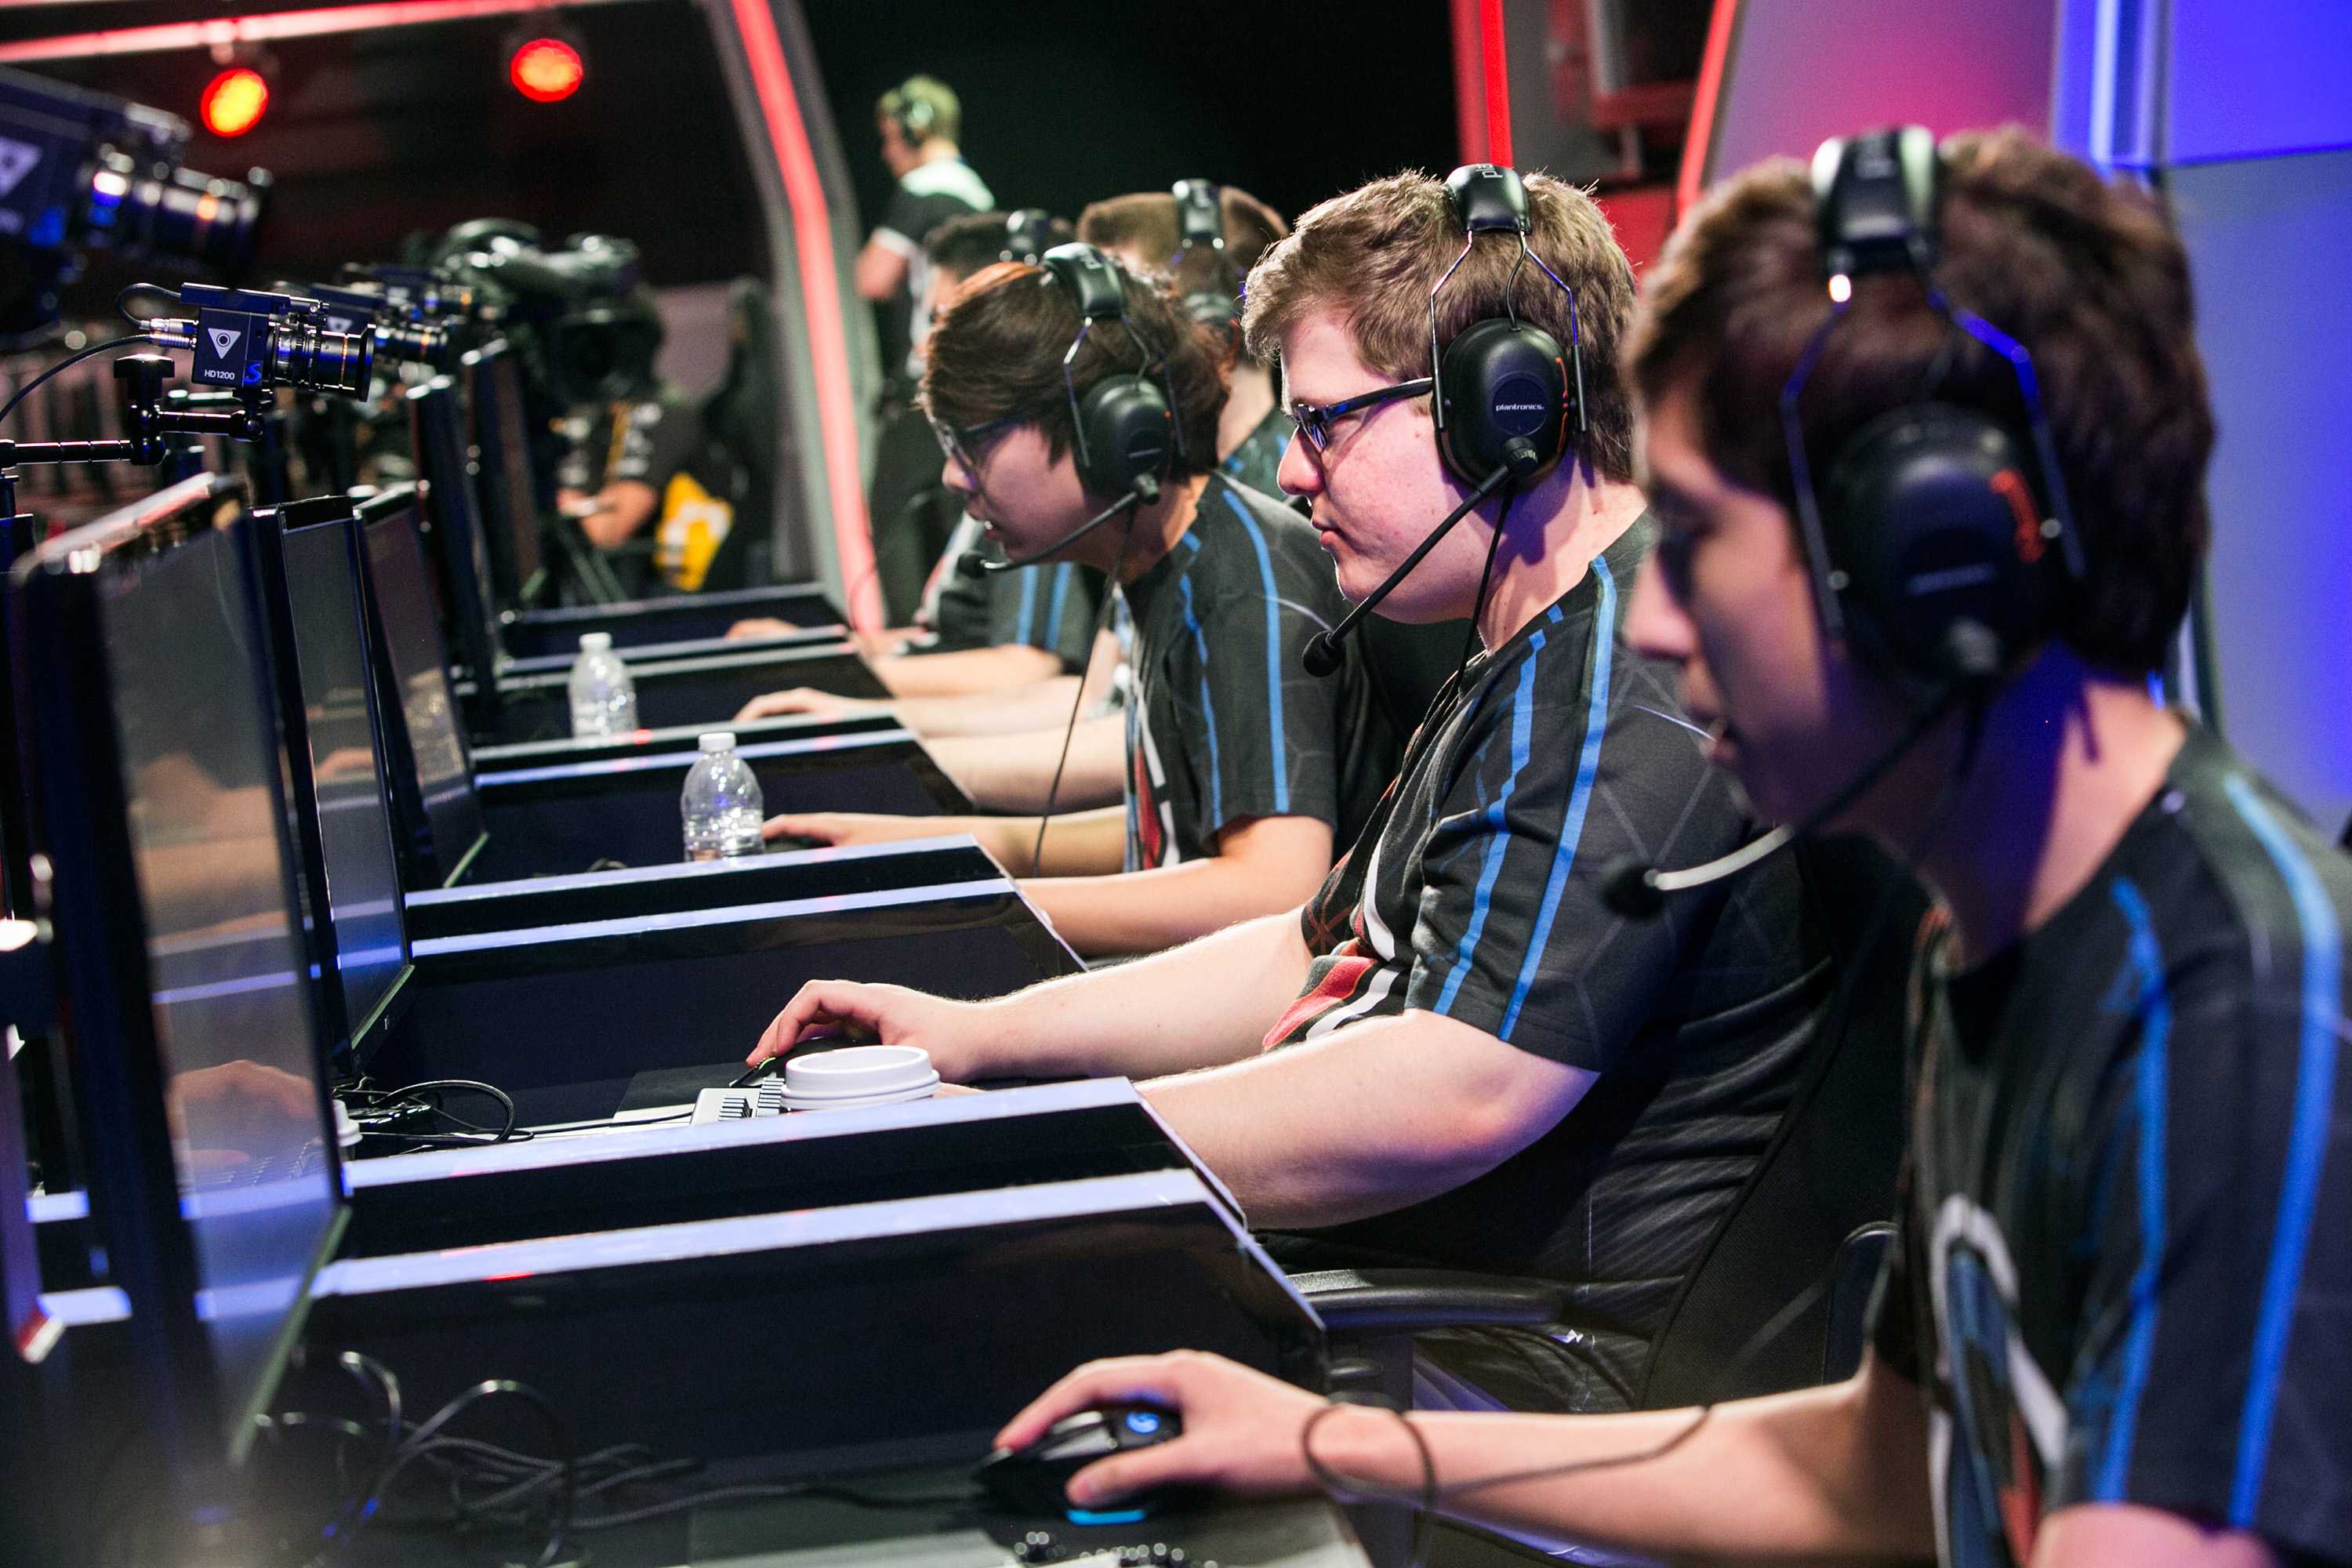 Team Fusions Zach Malhas Nien, second from right, leads his fellow teammates as they compete with Team Dignitas during a broadcasted League of Legends tournament event to enter the North American LCS league, at Riot Games studio on April 26, 2015 in Los Angeles. (Marcus Yam/Los Angeles Times/TNS)